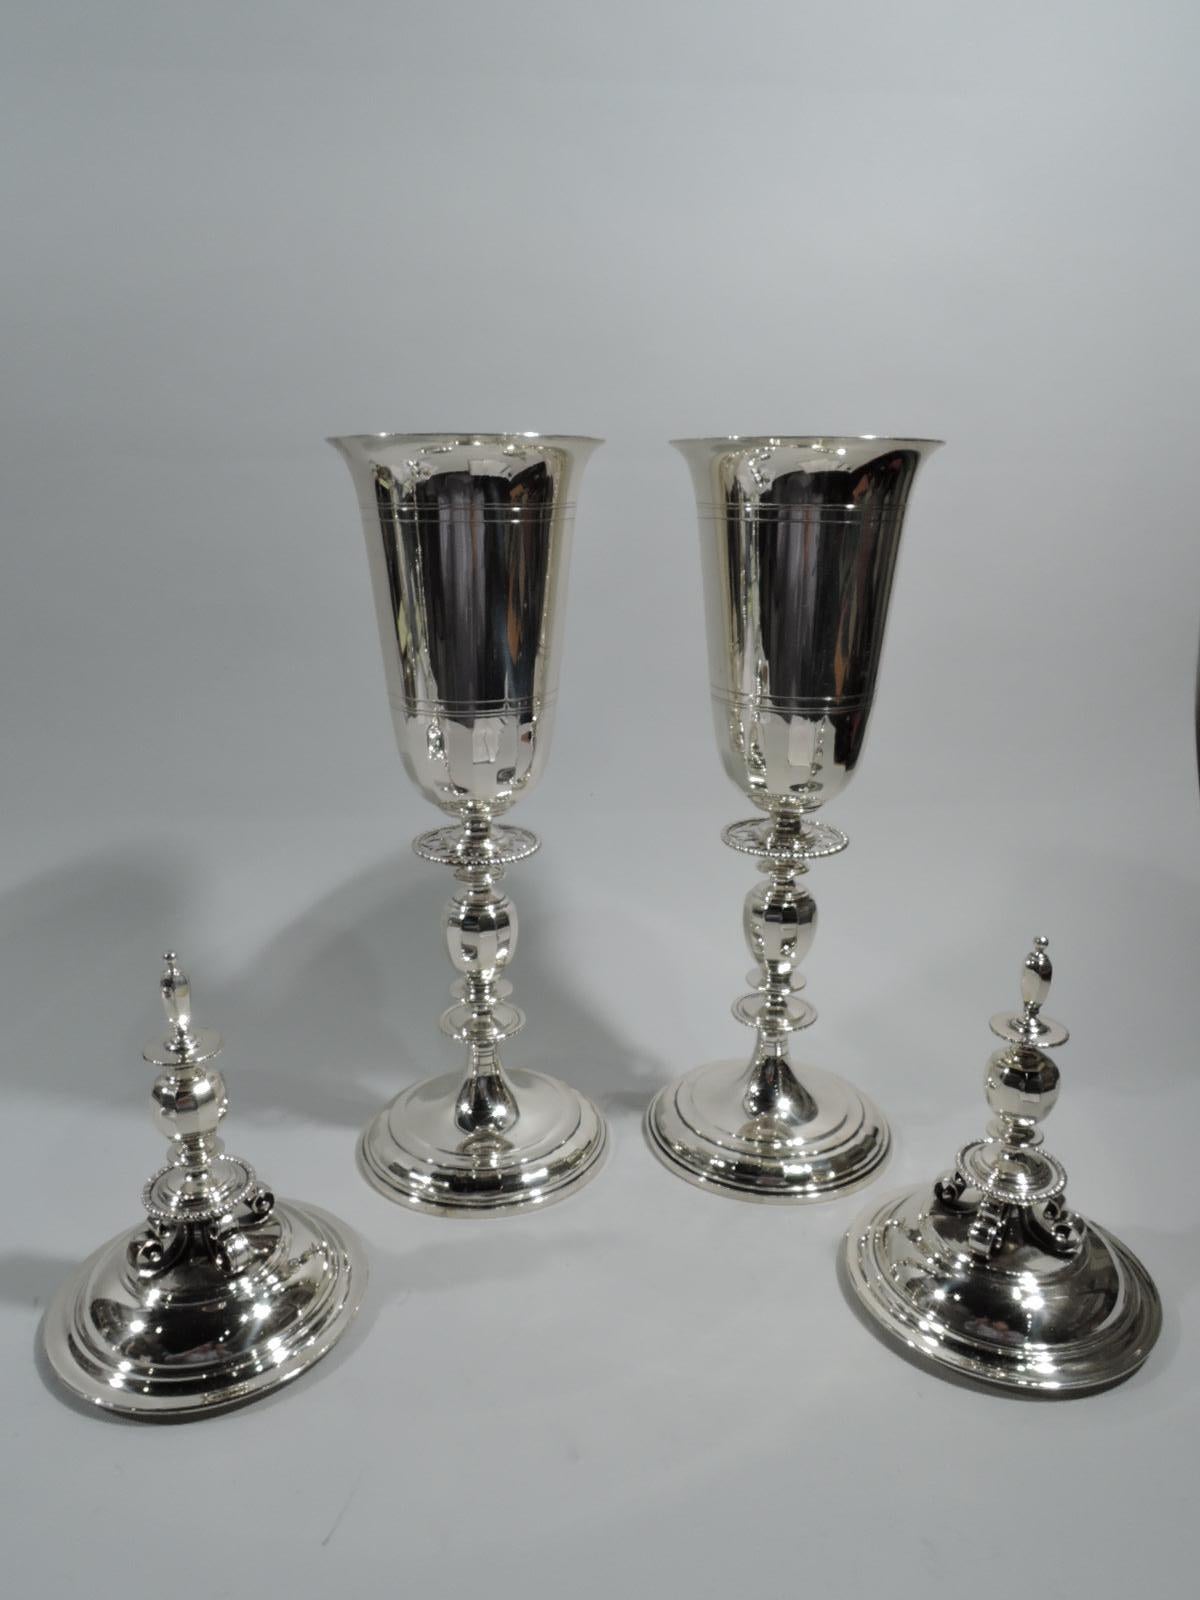 Pair of Art Deco classical sterling silver covered urns. Made by Tiffany & Co. in New York, ca 1919. Each: Ovoid urn with tooled line borders. Cover domed with fancy finial comprising spool support with 4 scrolled brackets to which is mounted knops,